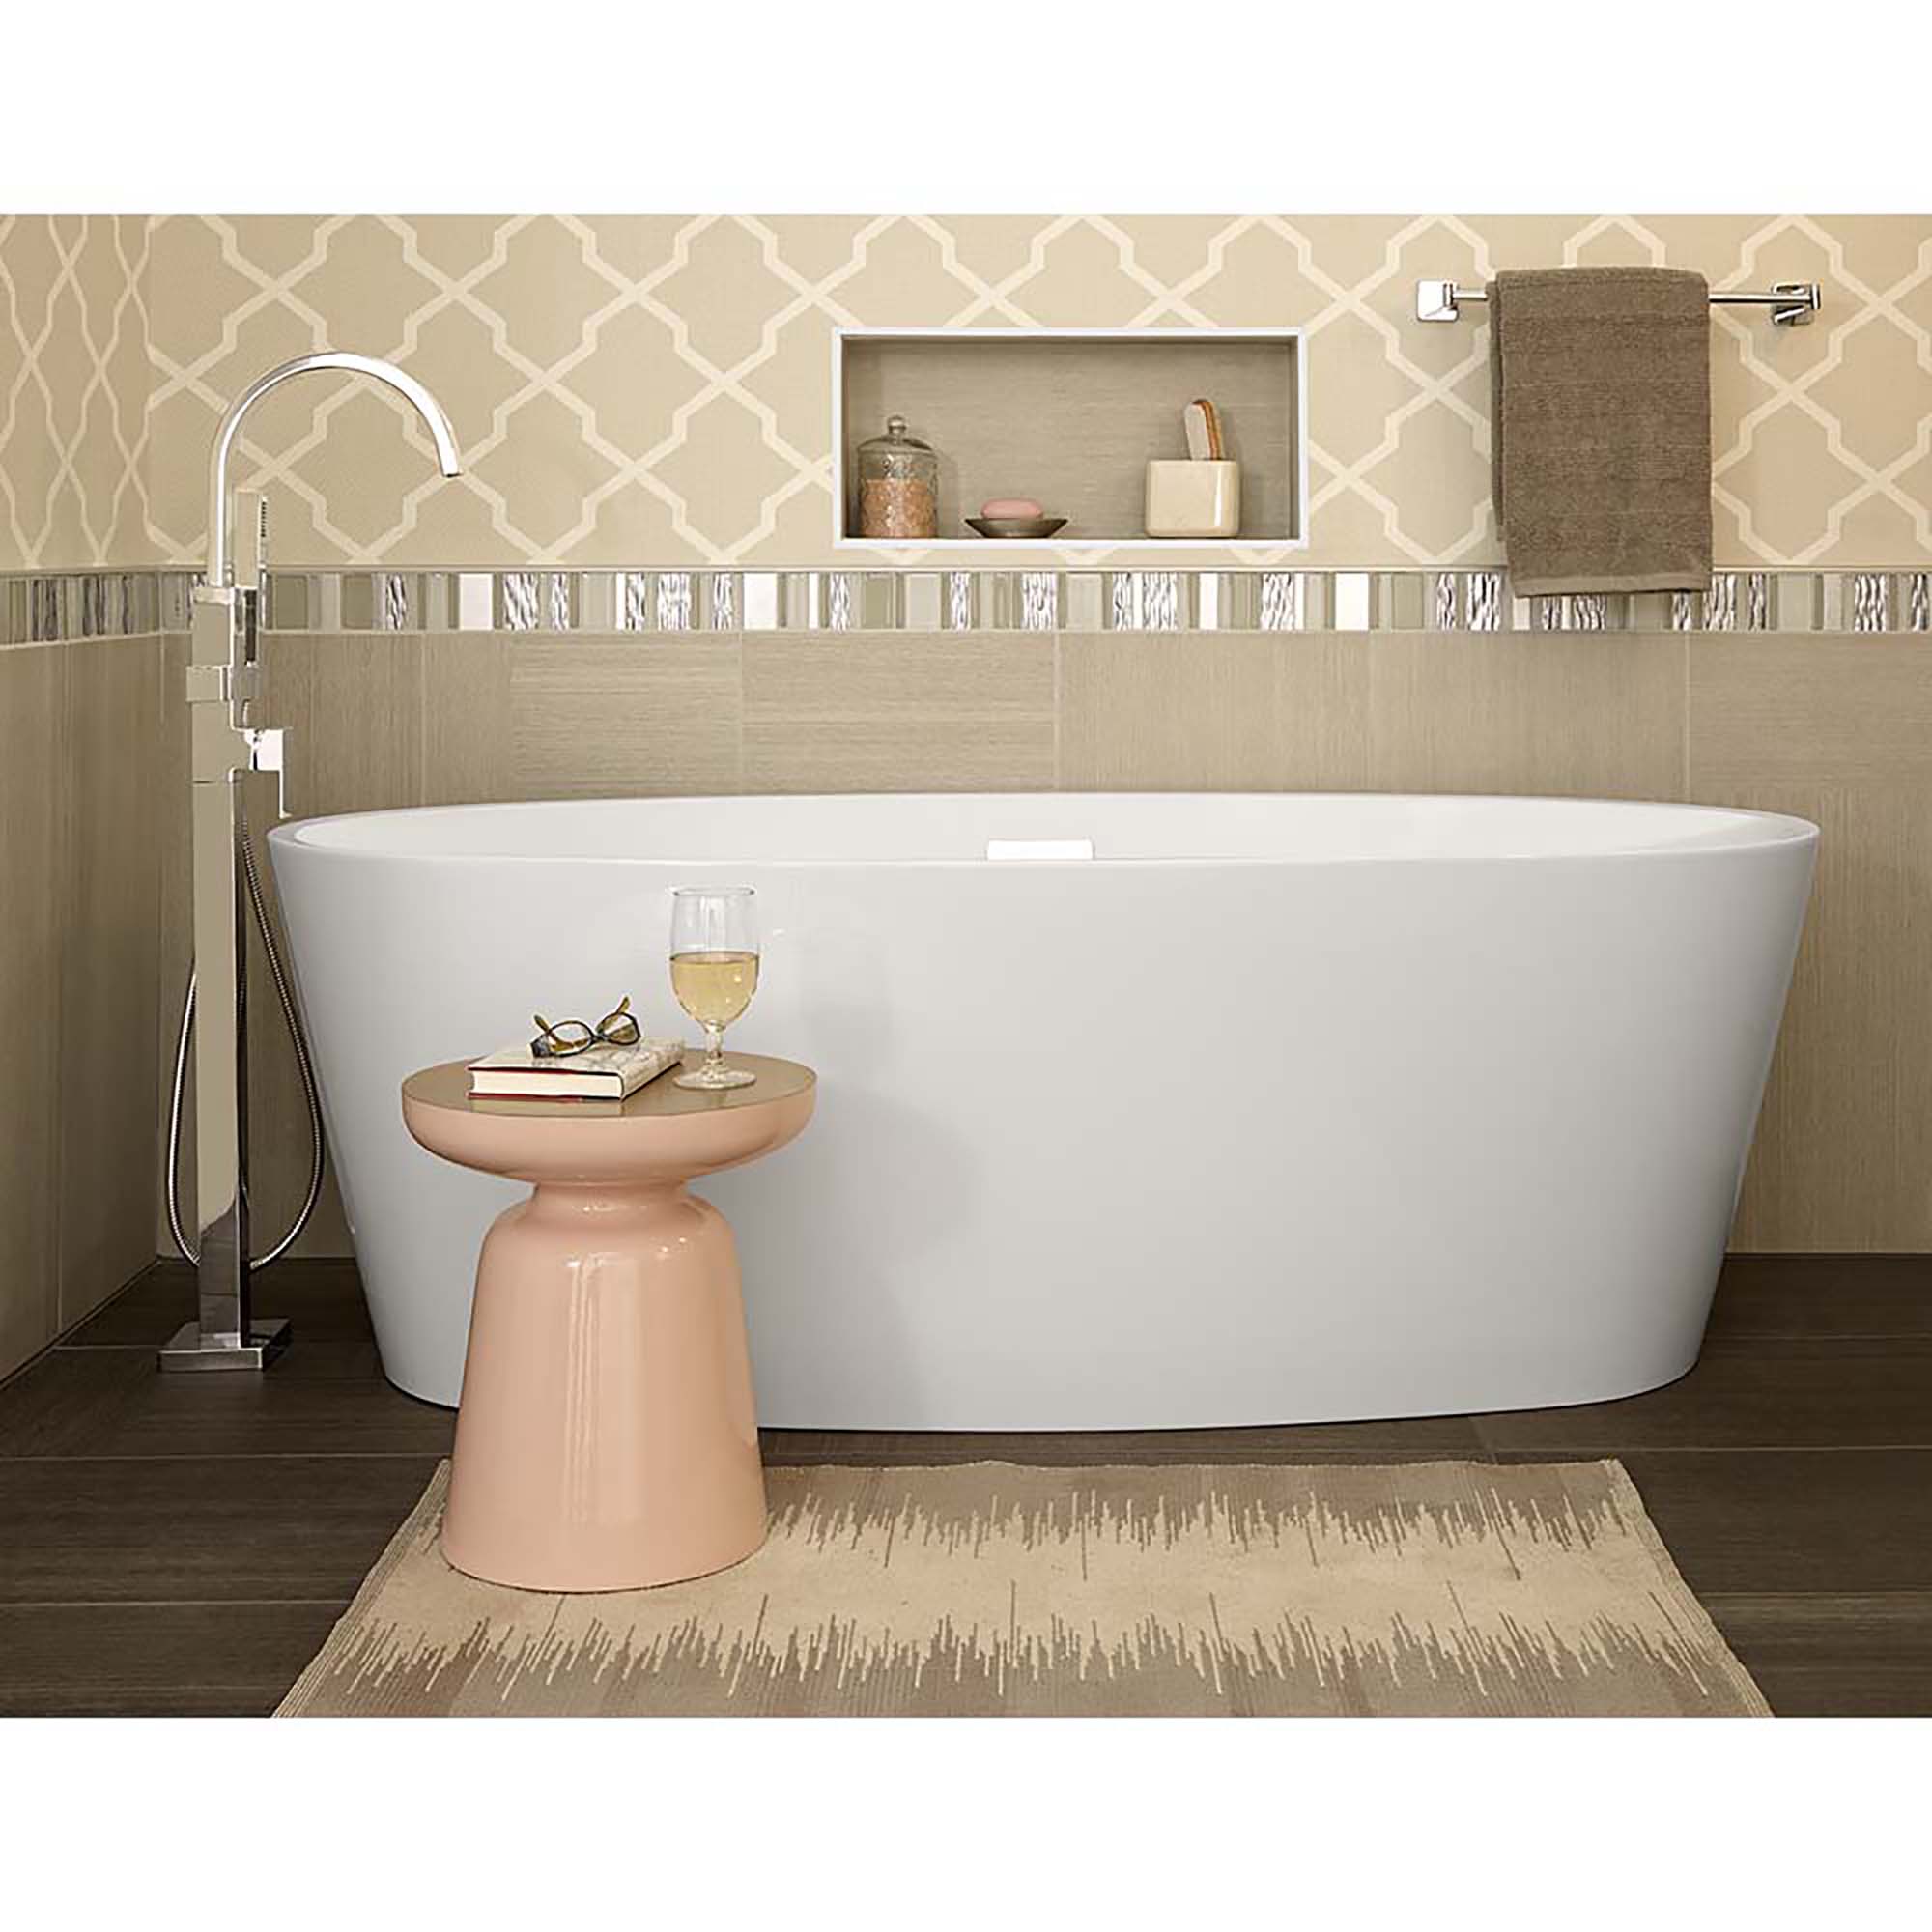 Contemporary Square Tub Trim W/Handshower In Chrm 